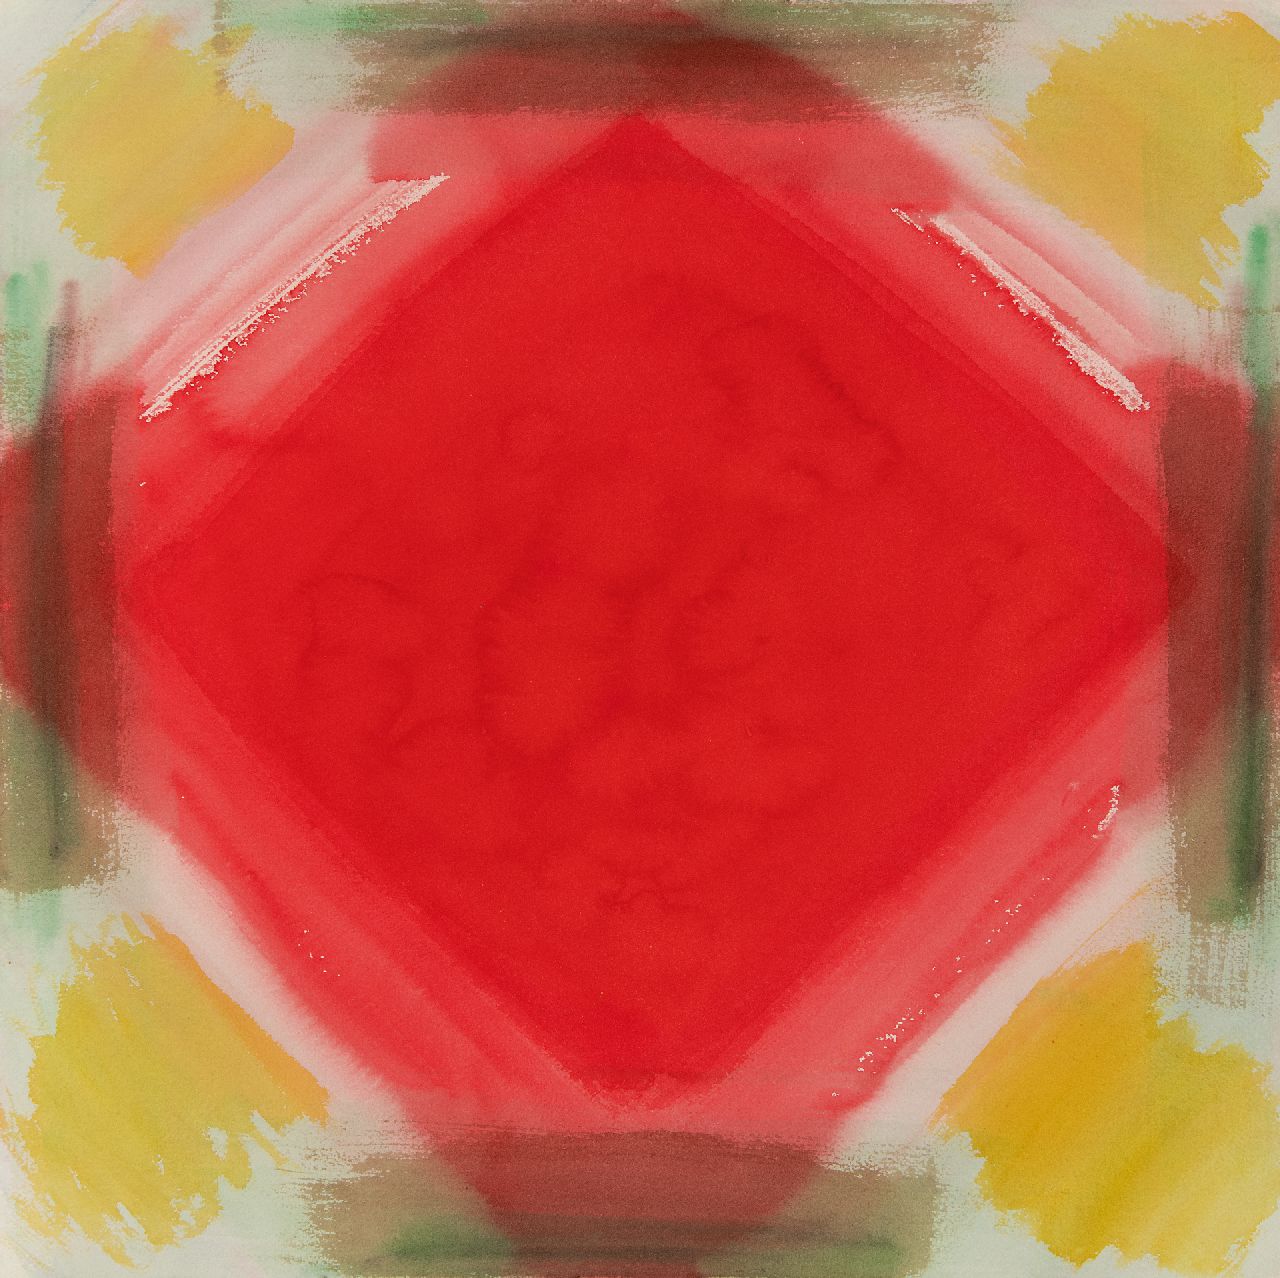 Eric de Nie | Kaleidoscoop, watercolour on paper, 56.5 x 56.5 cm, signed on the reverse and executed 1987